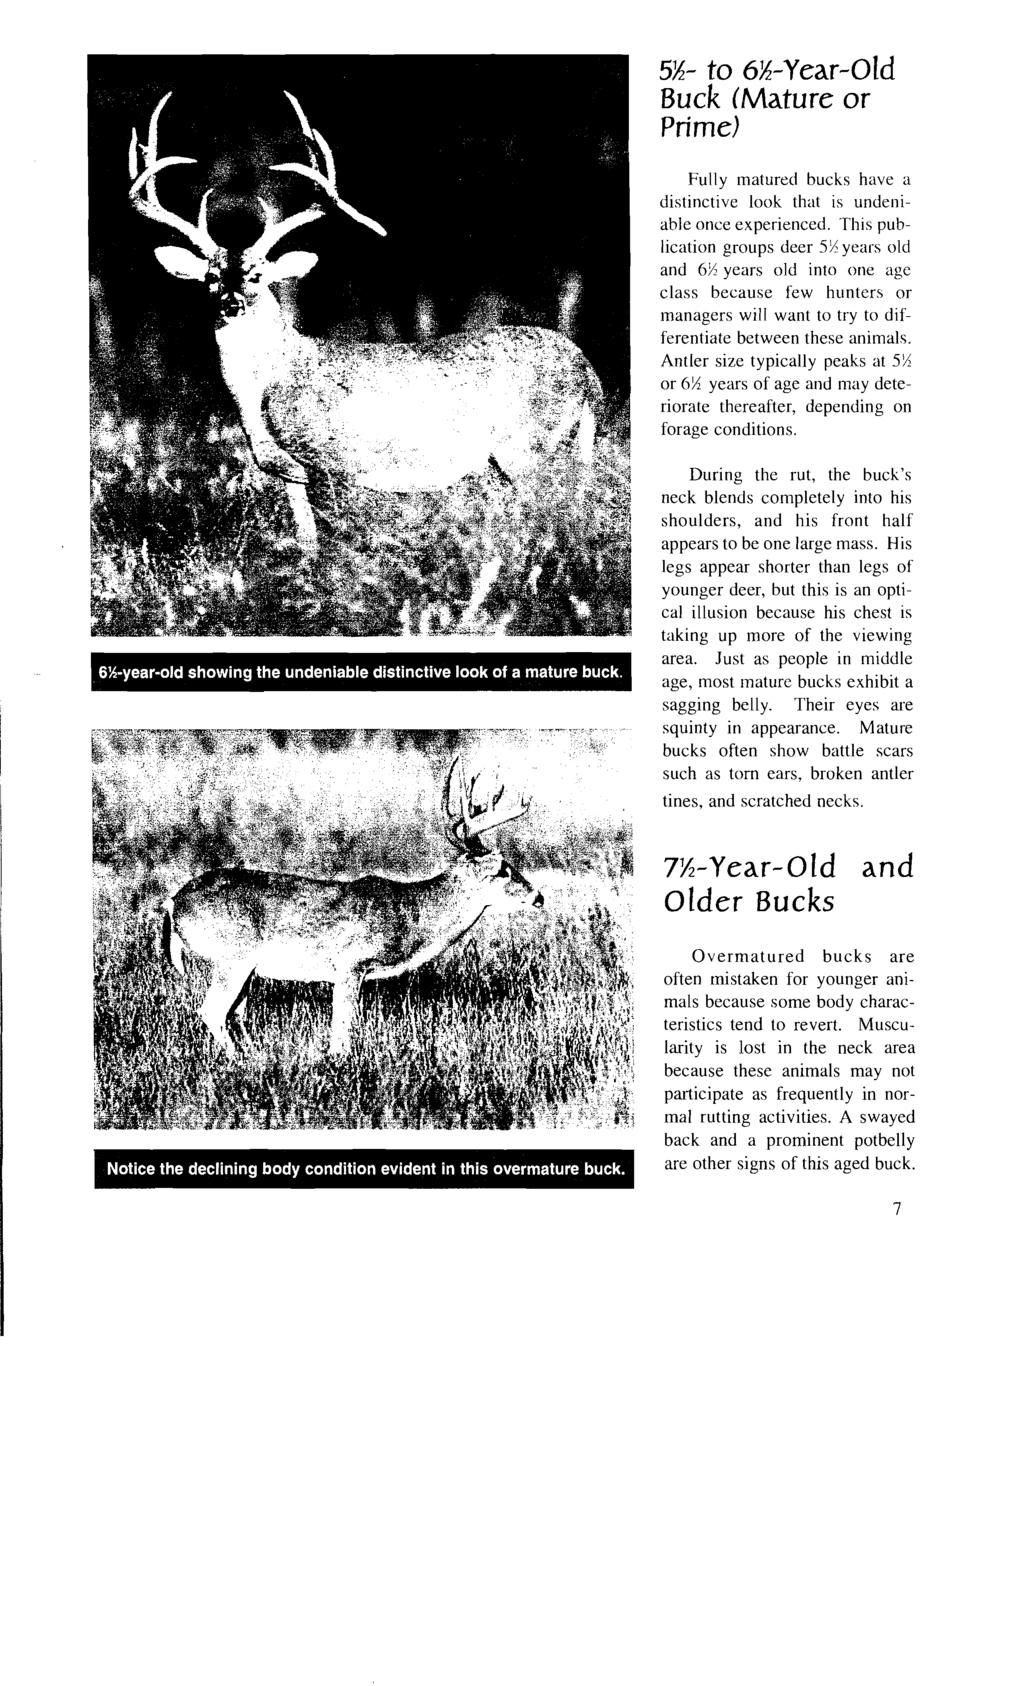 5%- to 6%-year-Old Buck (Mature or Prime) Fully matured bucks have a distinctive look that is undeniable once experienced.